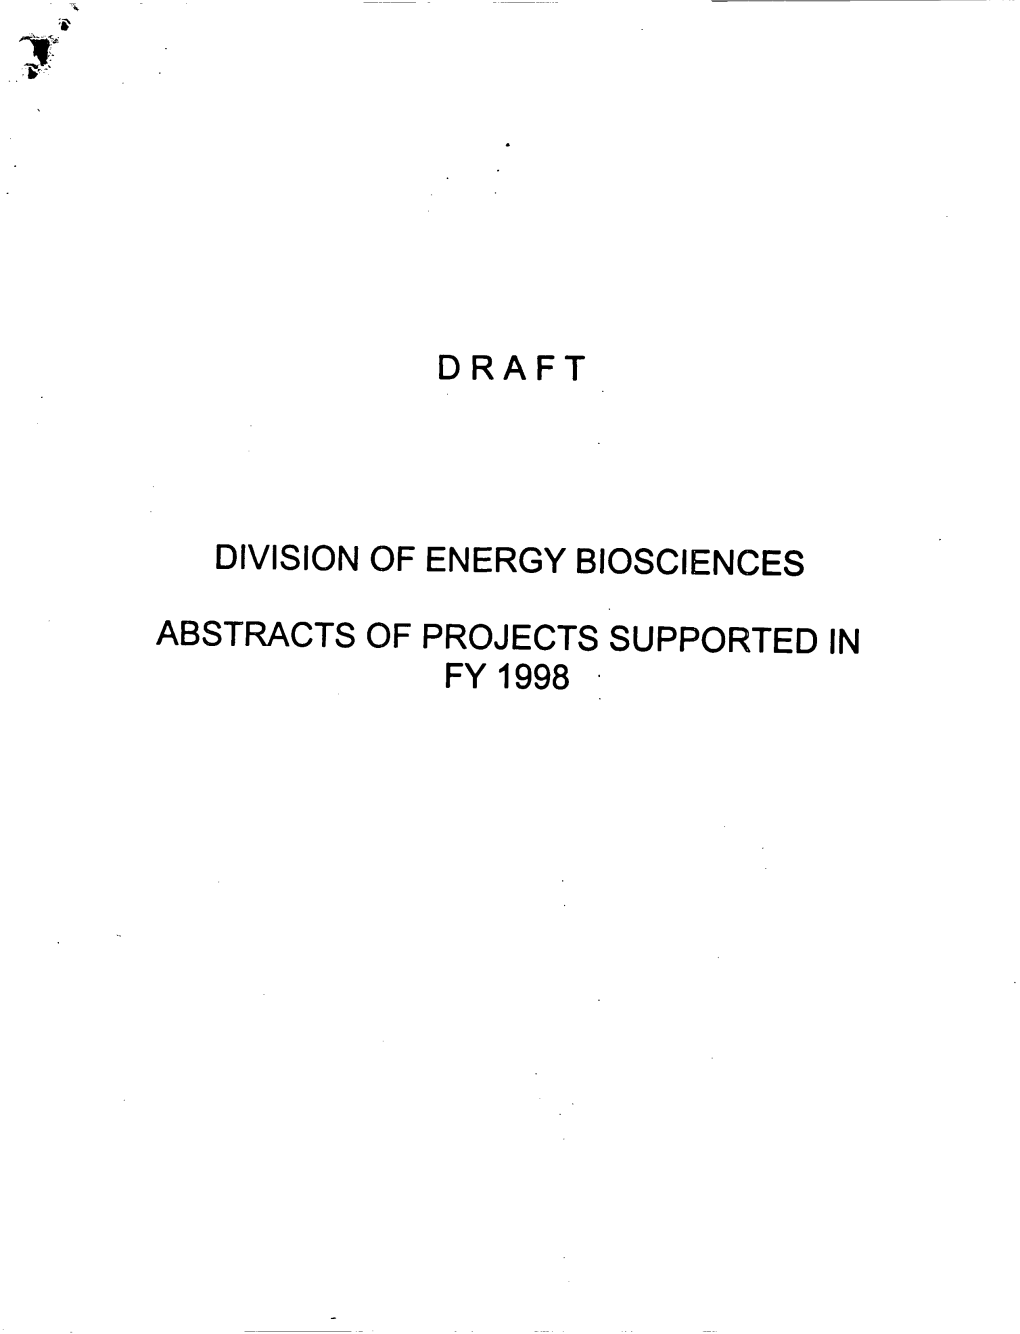 Draft Division of Energy Biosciences Abstracts Of